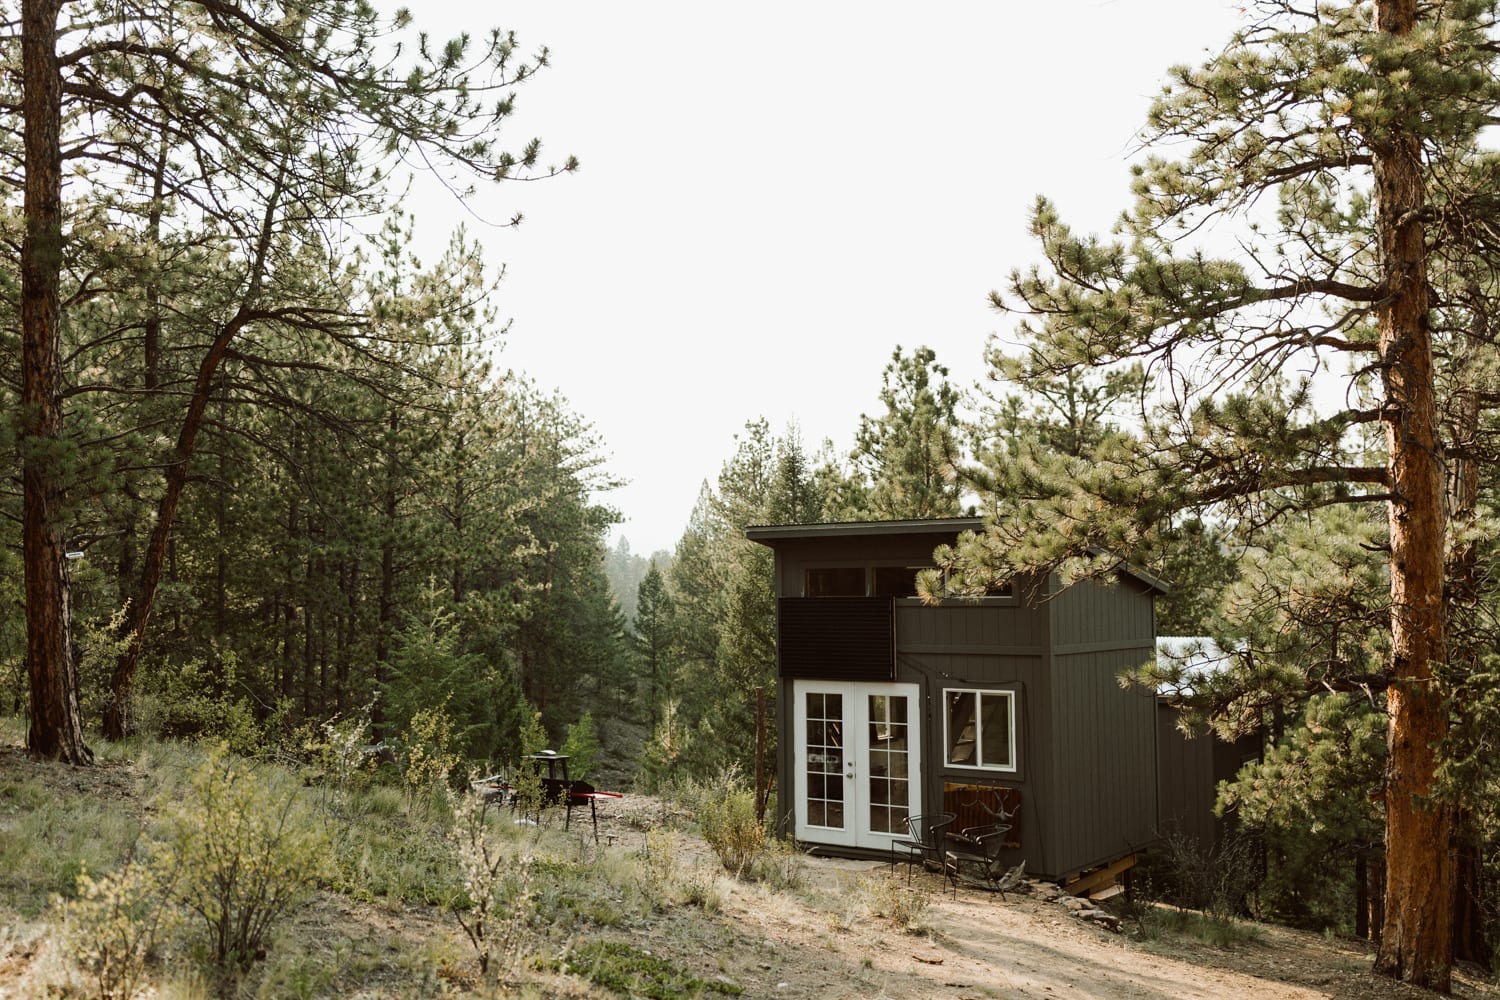 The cabin is tucked away in the pine trees